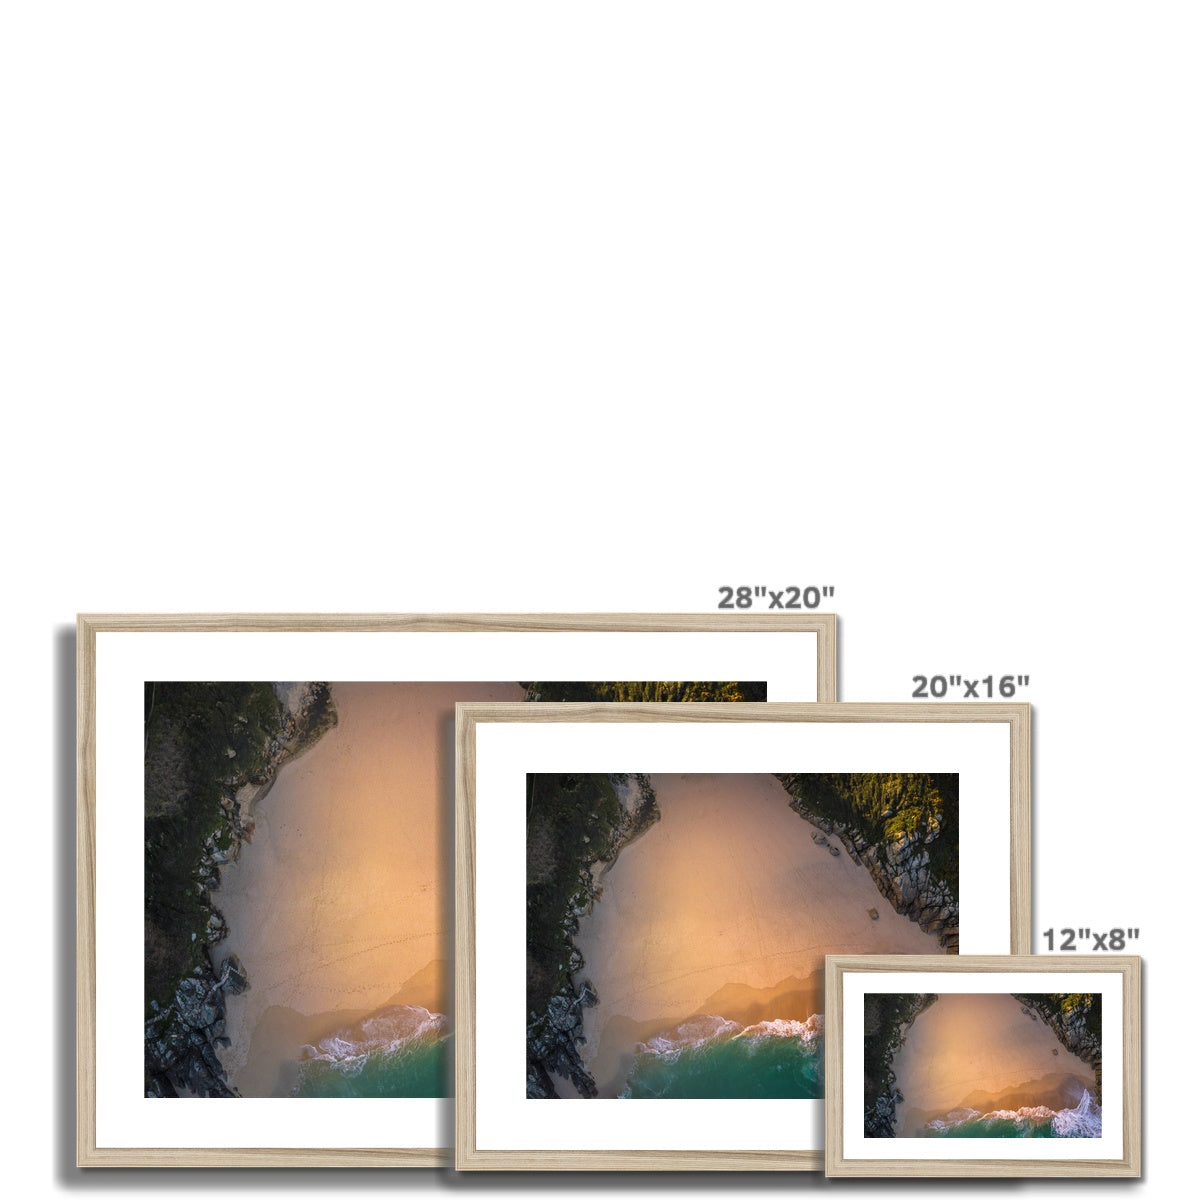 porthcurno from above frame sizes